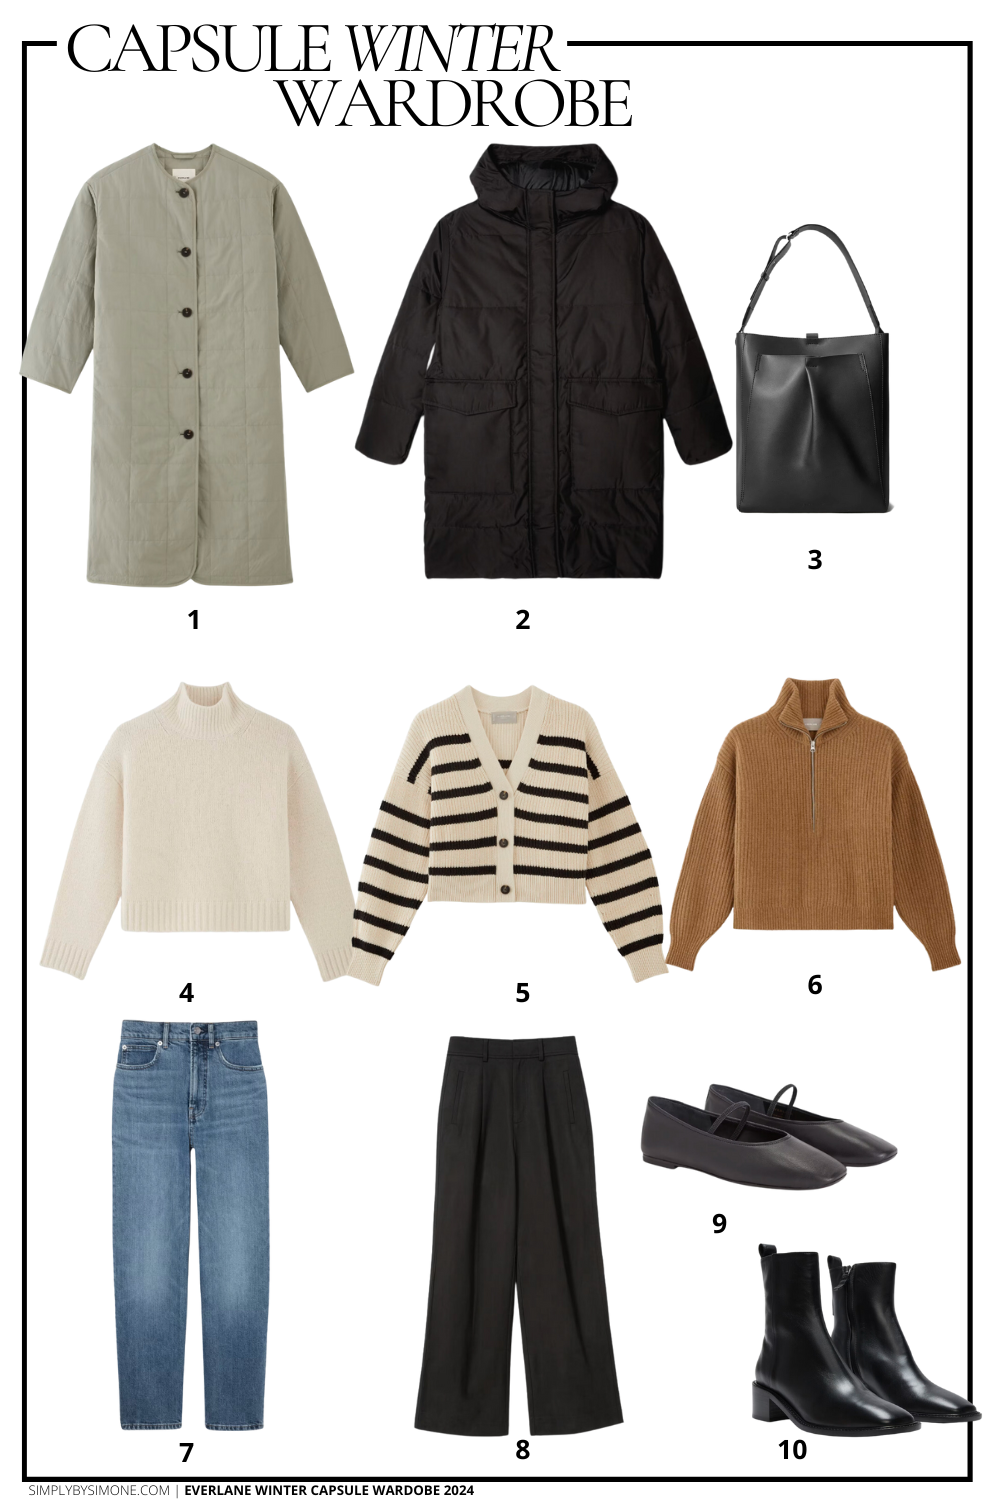 Everlane Winter Capsule Wardrobe Outfit Combinations Items 1-10